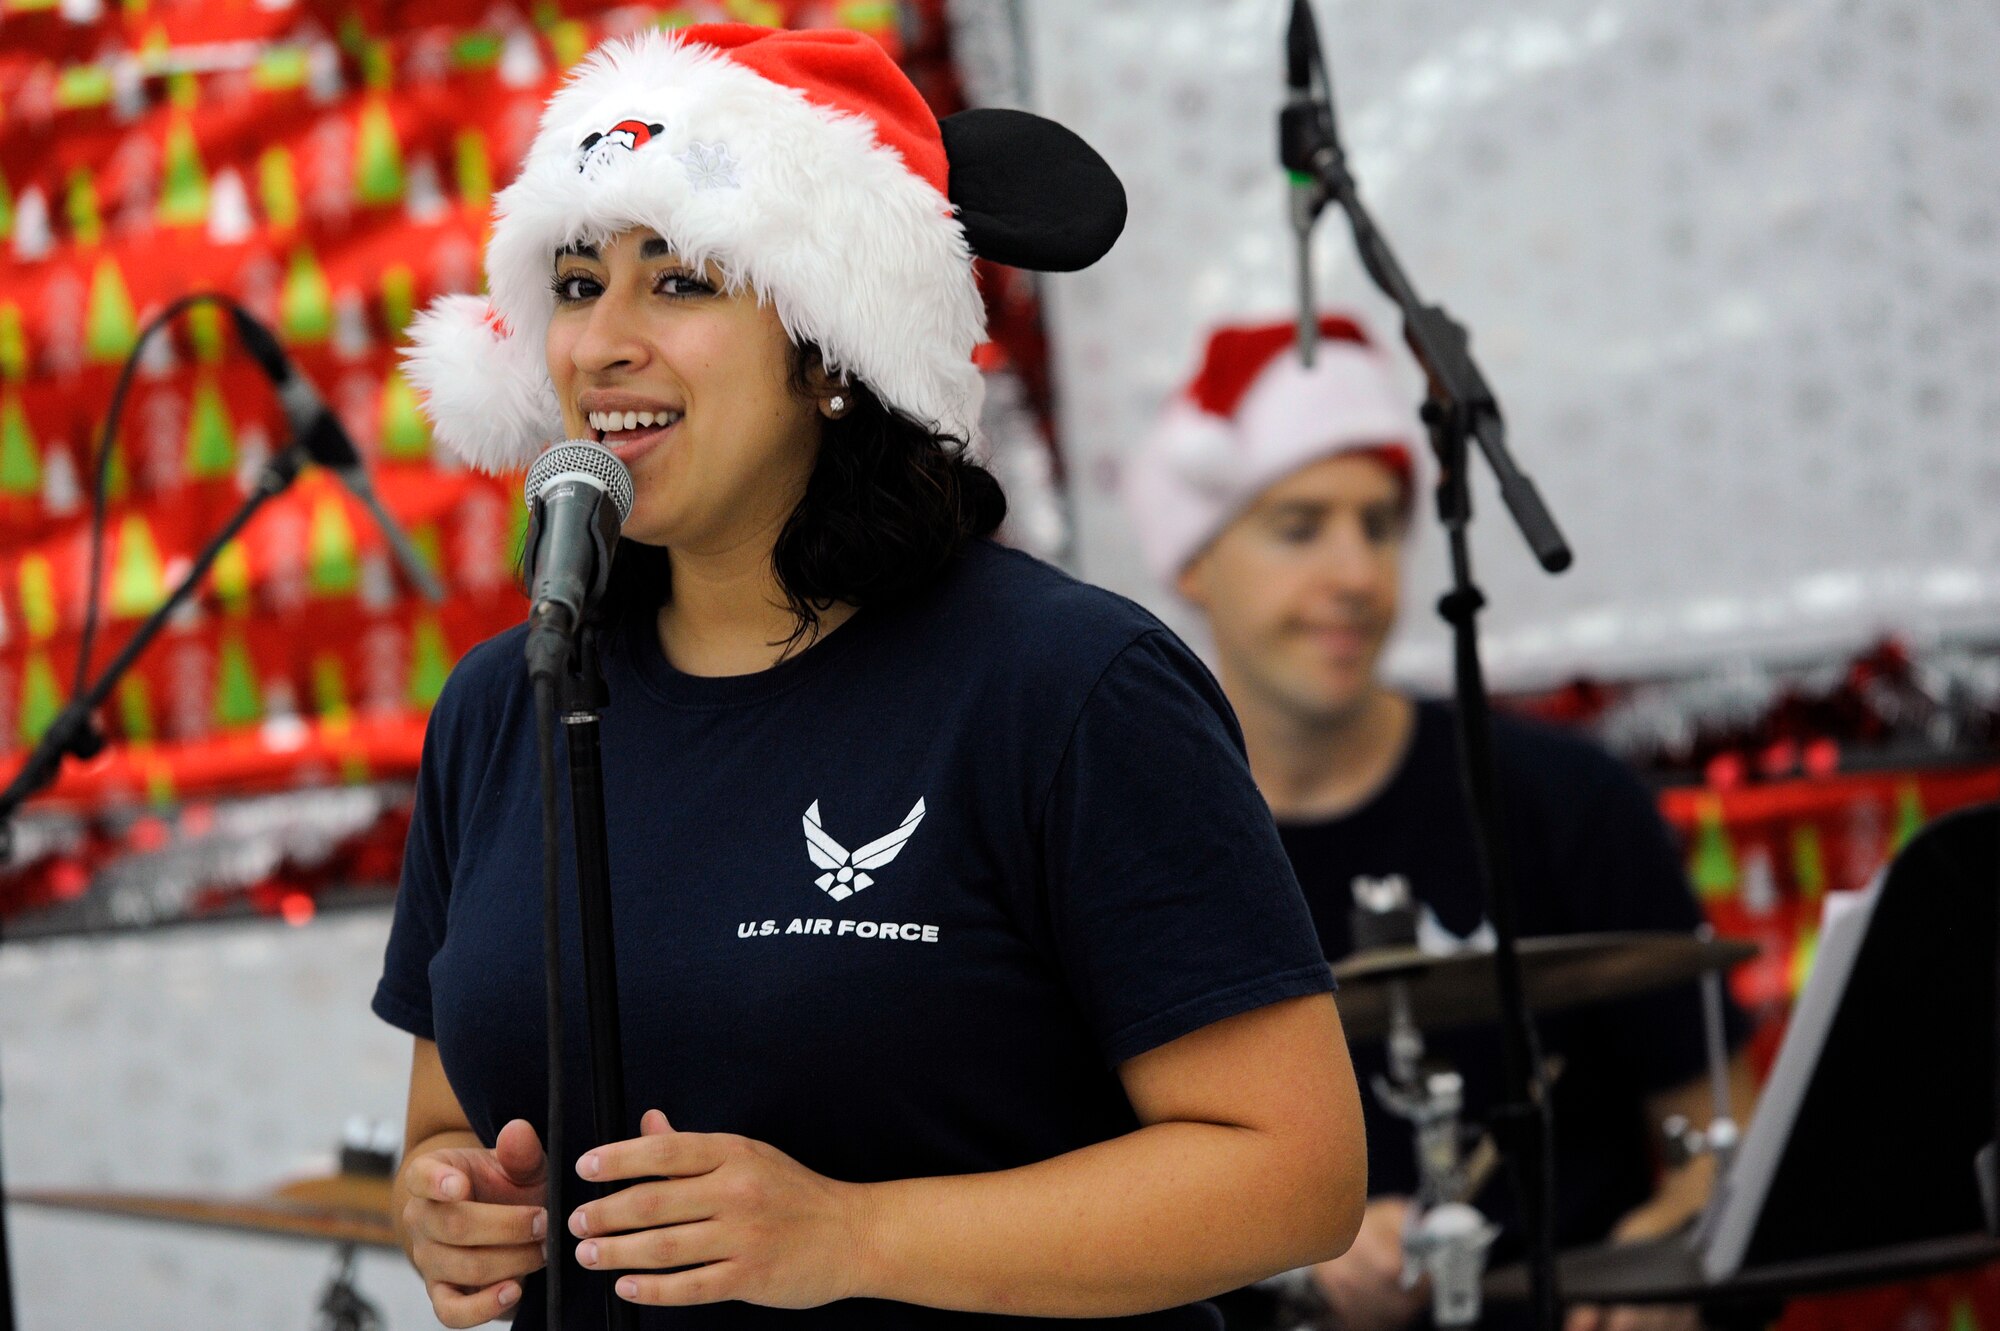 U.S. Air Force Senior Airman Alycia Cancel, U.S. Air Forces Central Command Band vocalist, sings a holiday song during a holiday kick-off event Dec. 1, 2018, at Al Udeid Air Base, Qatar. Service members and their families were able to play holiday games, watch live music performances, interact with Santa Claus and watch a tree lighting ceremony, during the event. (U.S. Air Force photo by Tech. Sgt. Christopher Hubenthal)